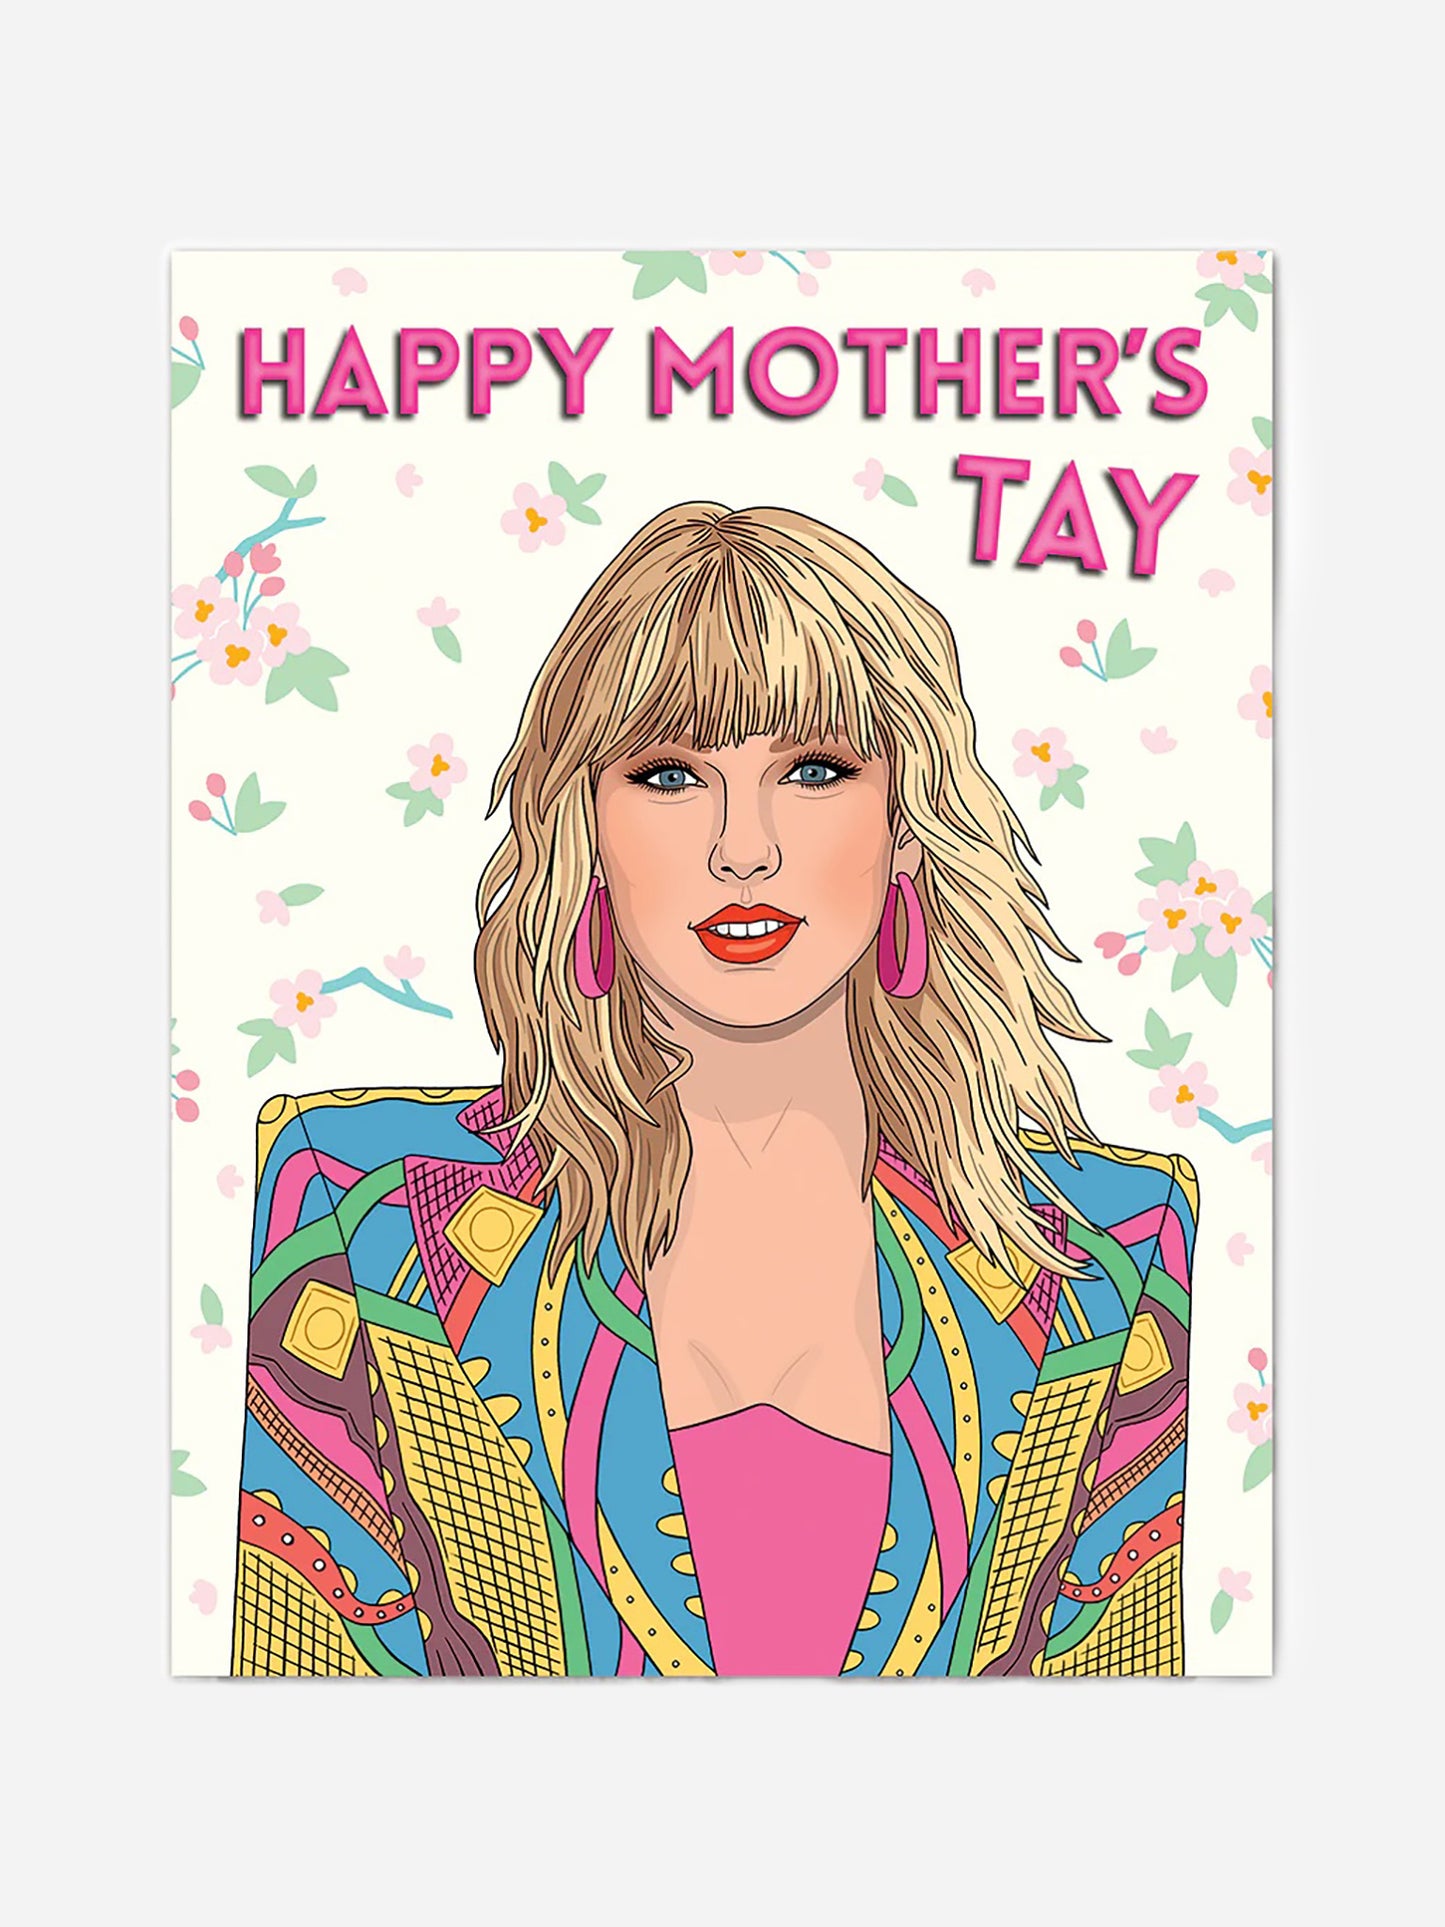 The Found Mother's TAY Card